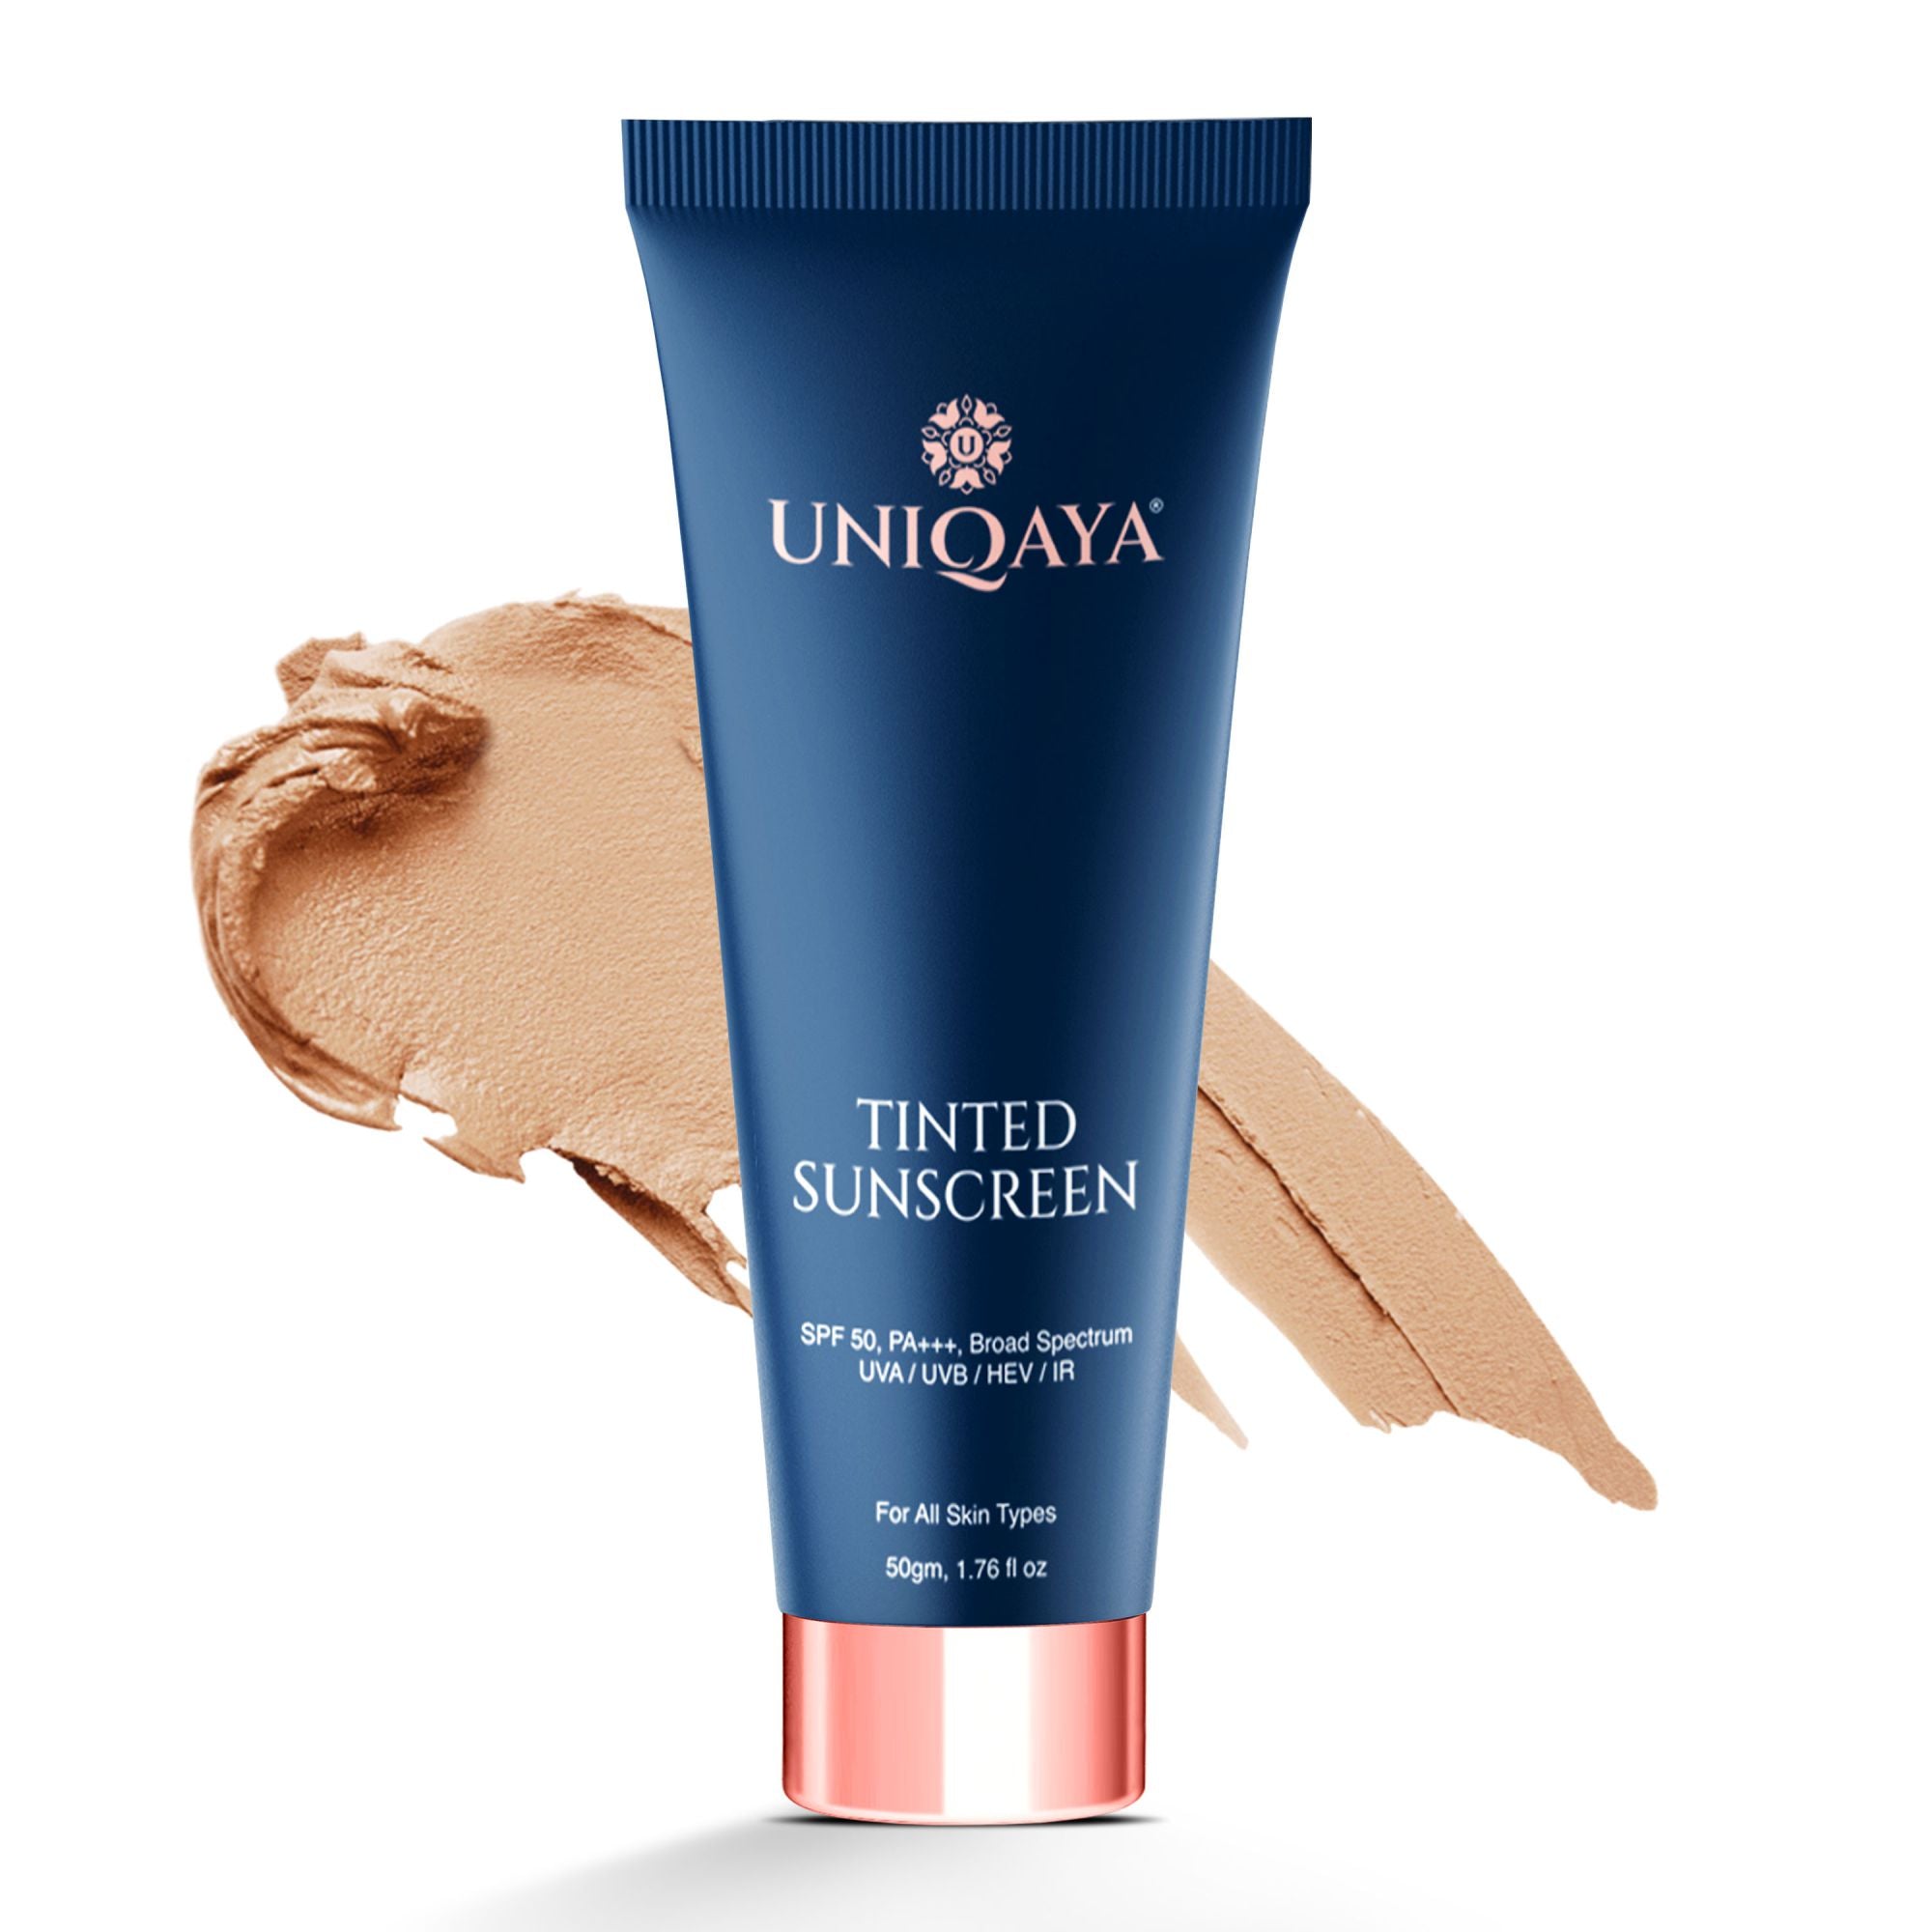 Uniqaya Tinted Sunscreen SPF 50 PA+++ For All Skin Types | Blue Light Protection | No White Cast